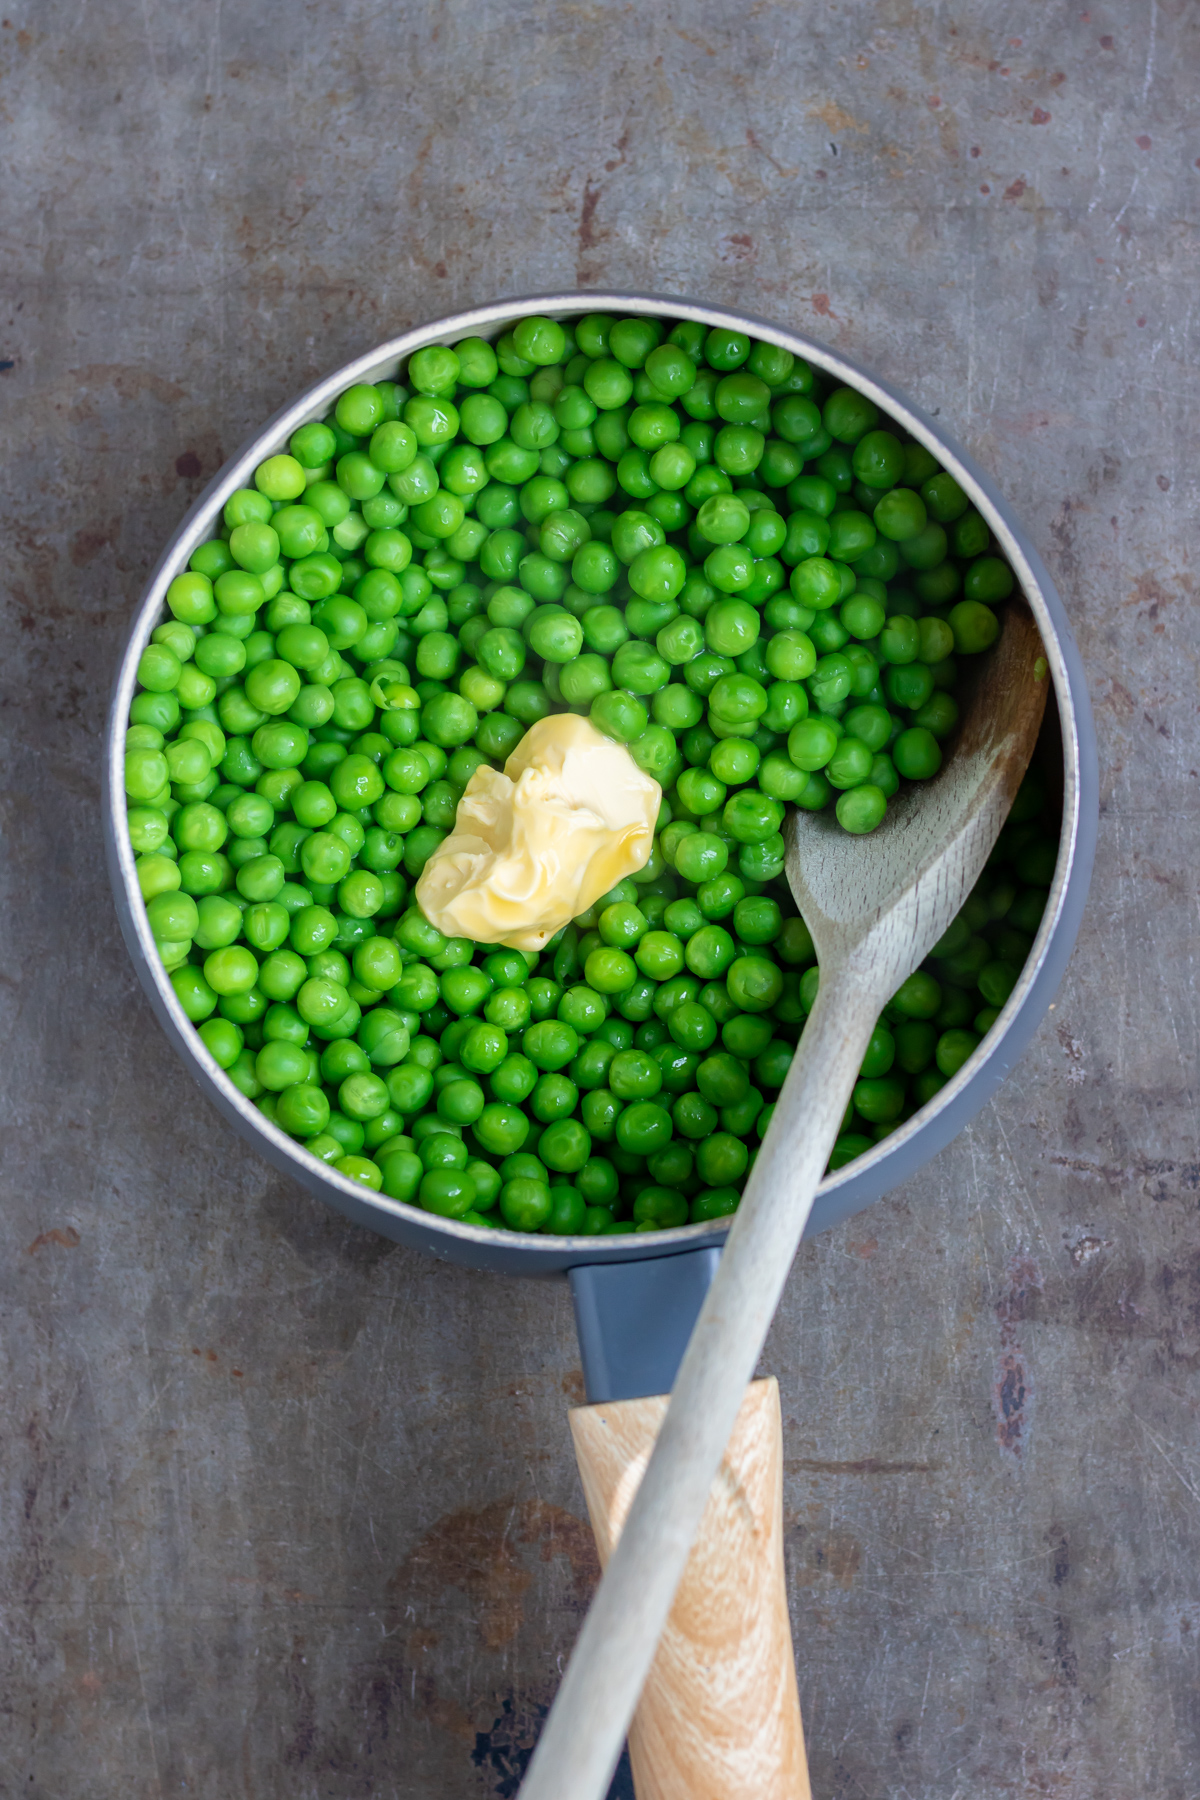 Butter stirred in and the peas slightly crushed.